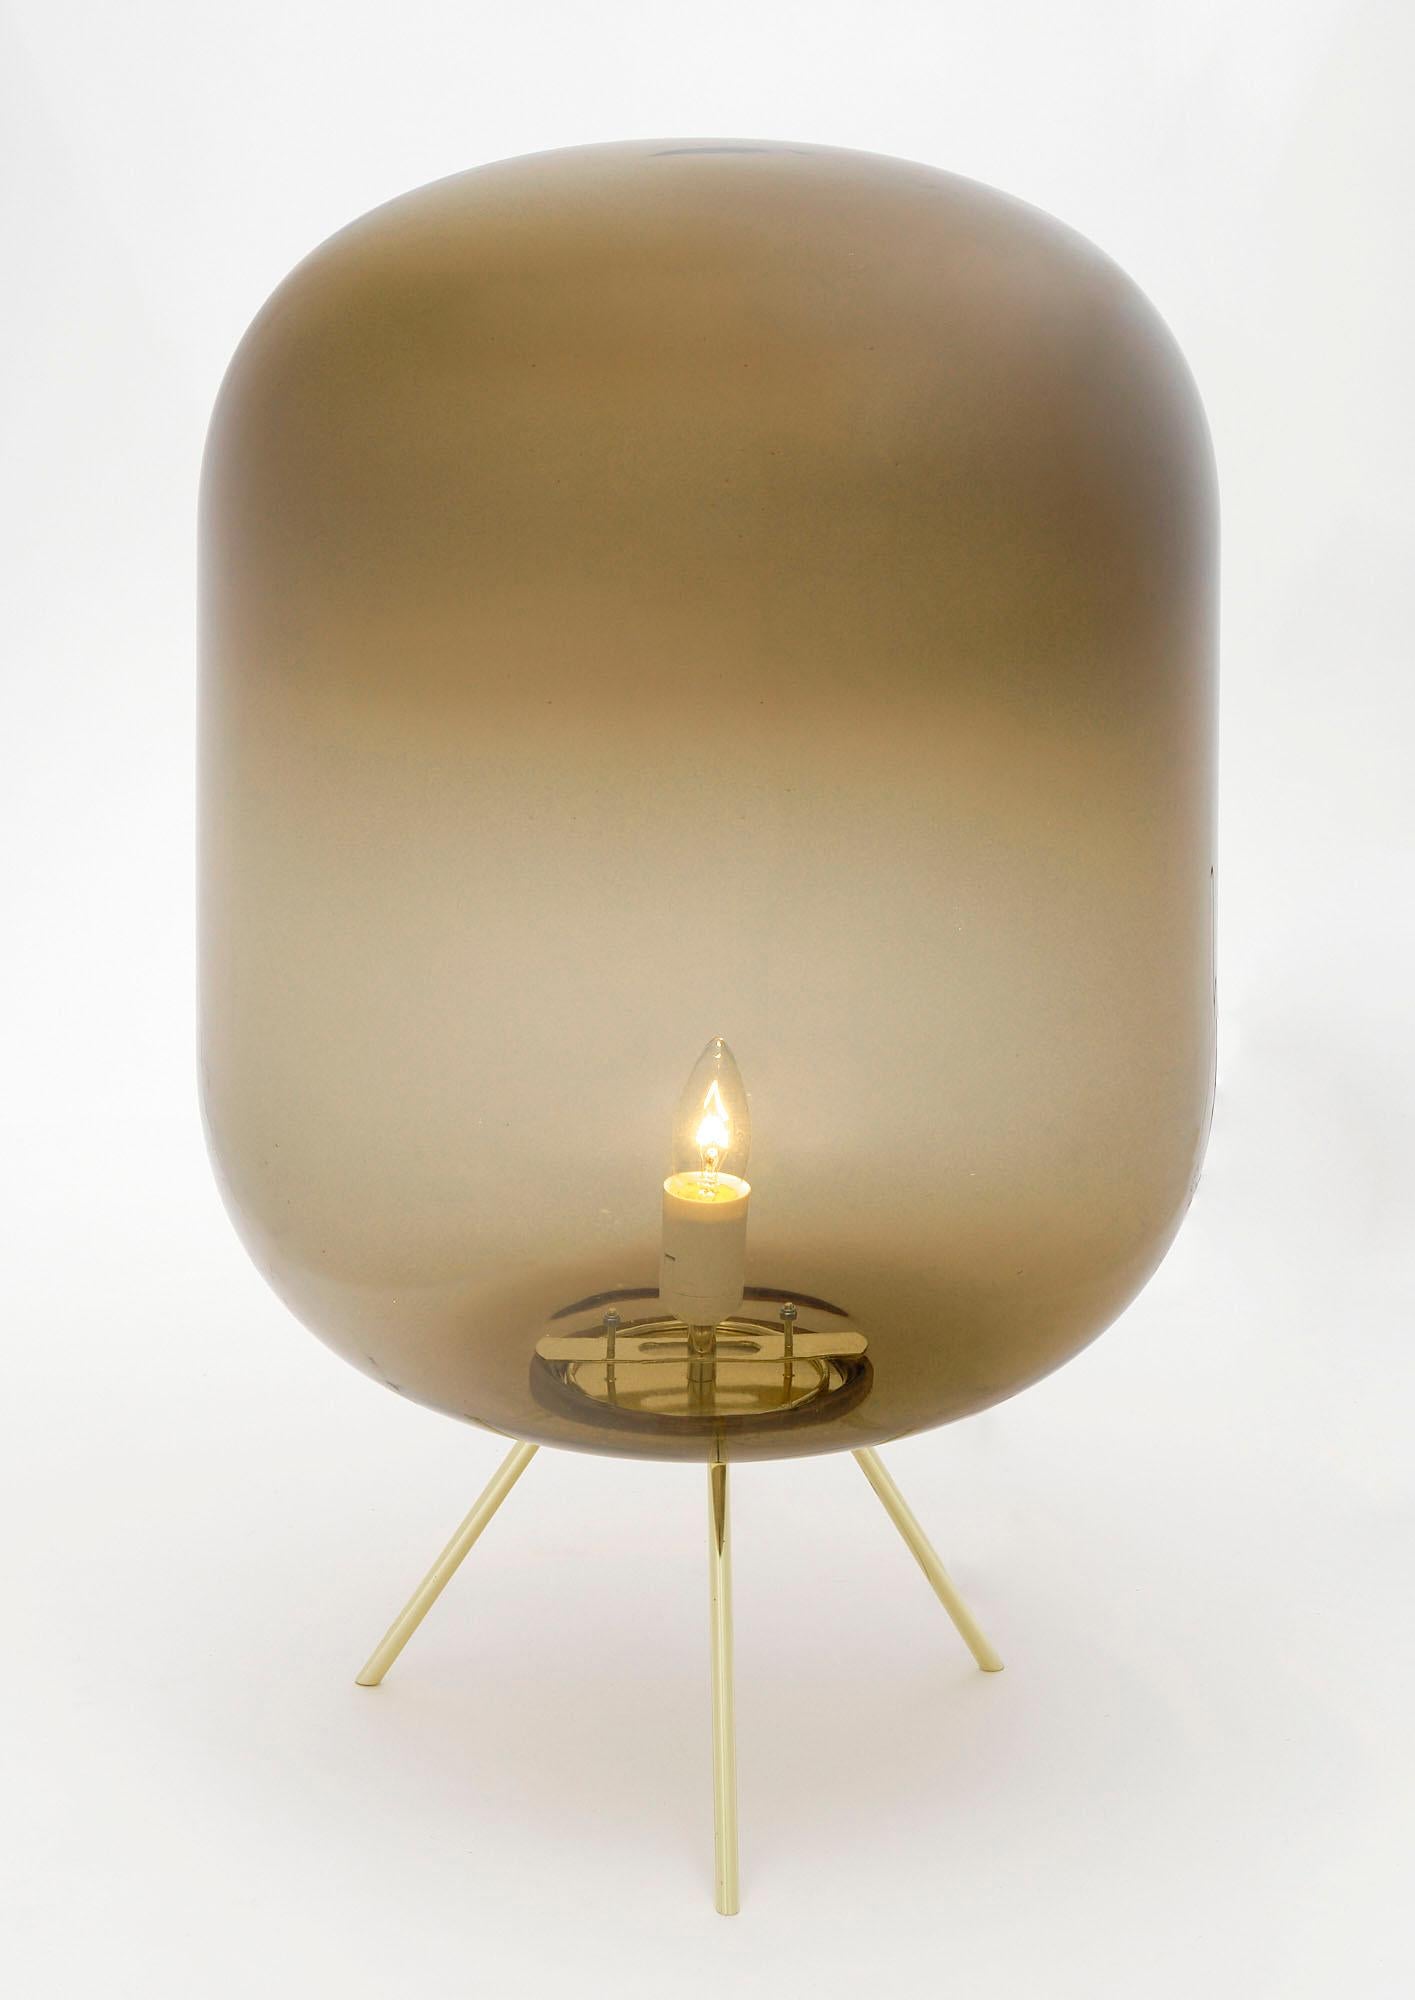 Lamp made of Murano glass in a smoked color with a tripod gilt brass base. This piece has been newly wired to fit US standards.